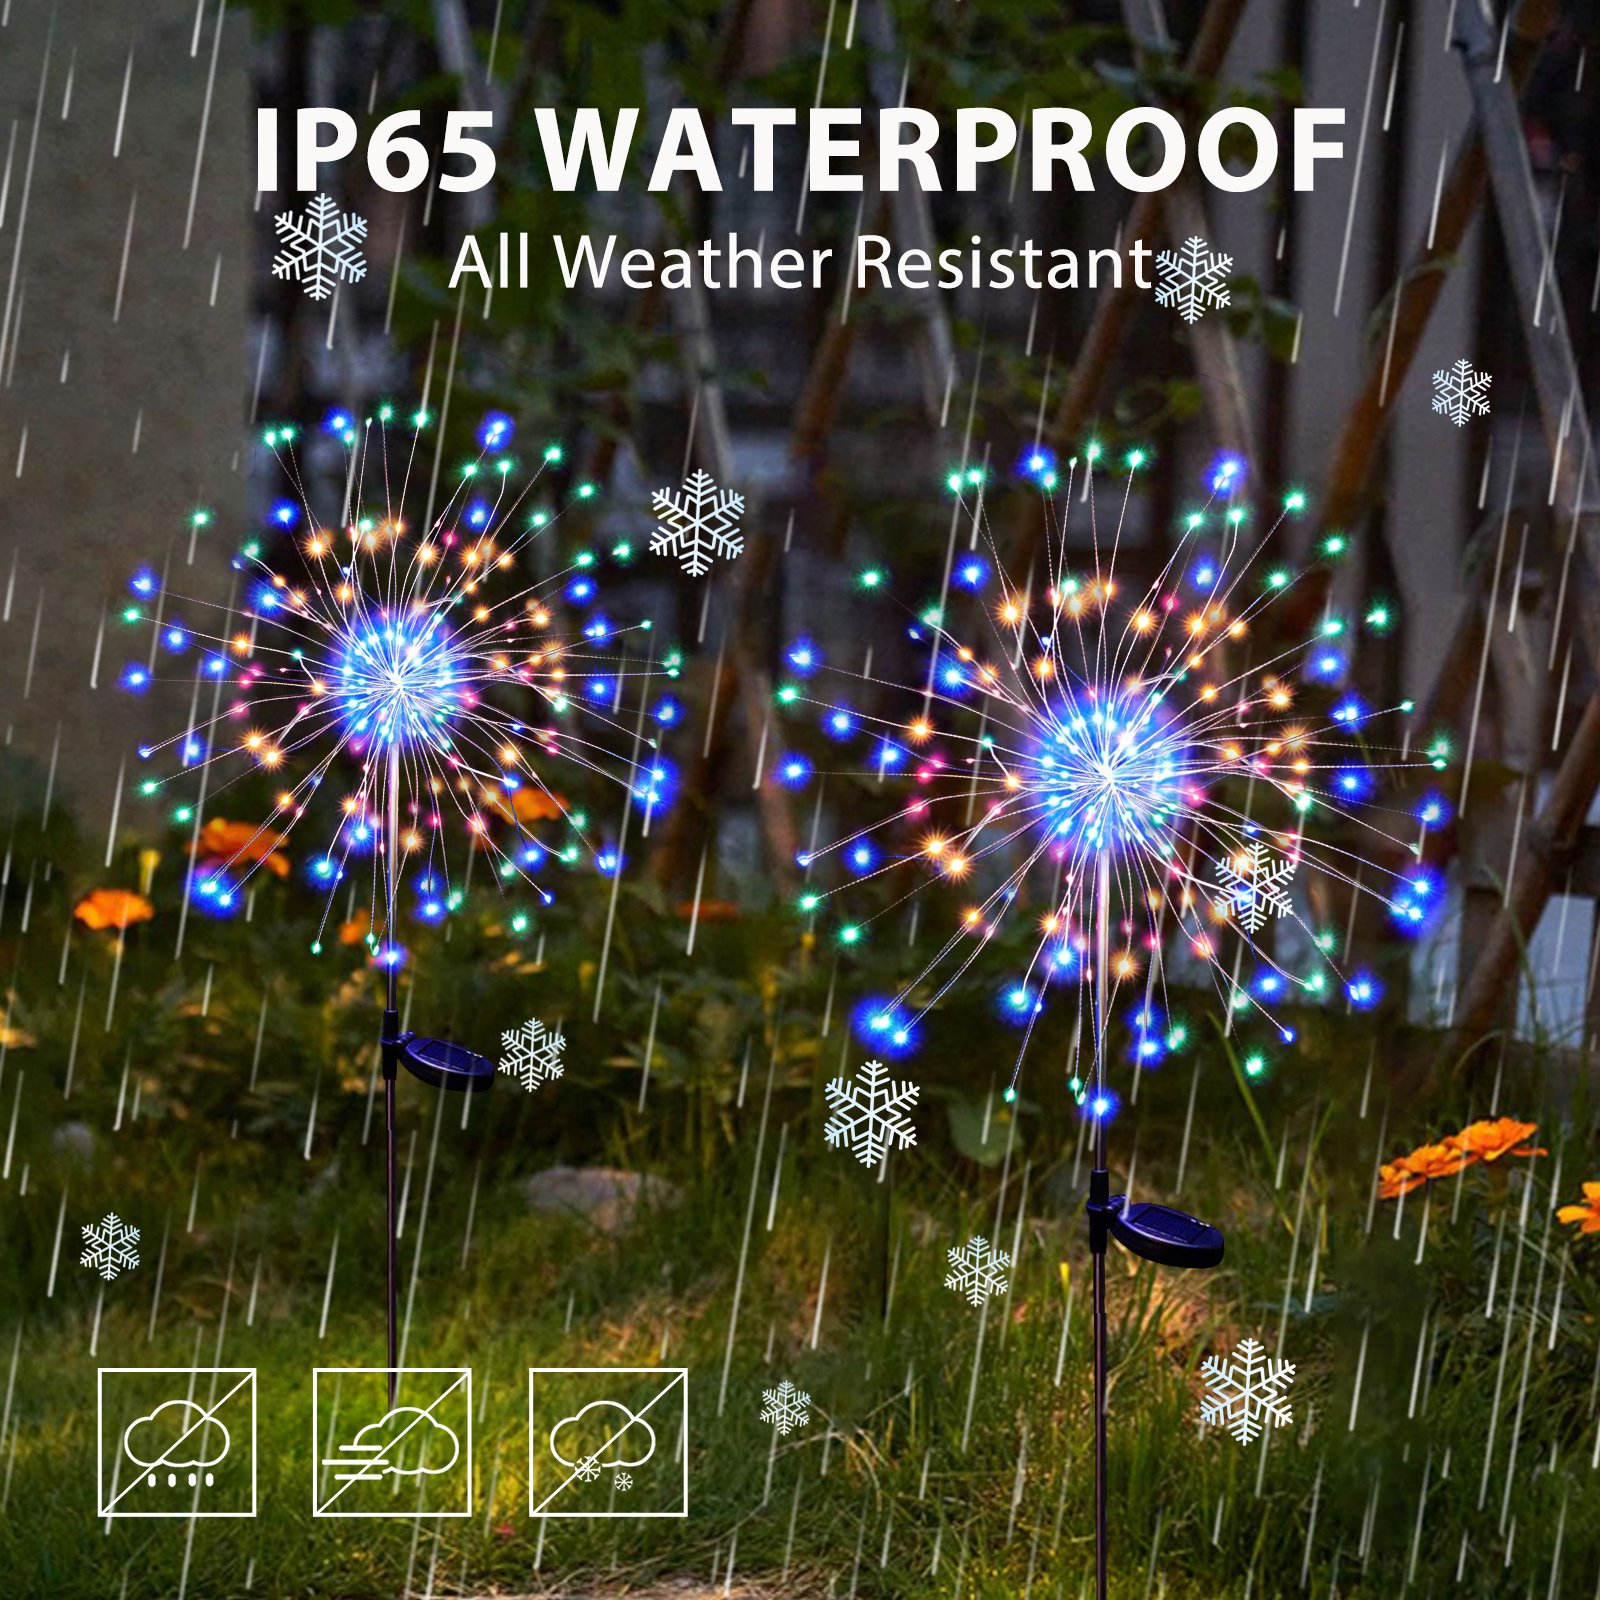 LED-Flood-Street-Lights-Solar-Garden-Lights-Fireworks-Lights-Outdoor-Waterproof-120-LED-2-Lighting-Modes-Auto-On-Off-Solar-Outdoor-Lights-for-Pathway-Yard-Christmas-Party-etc-33